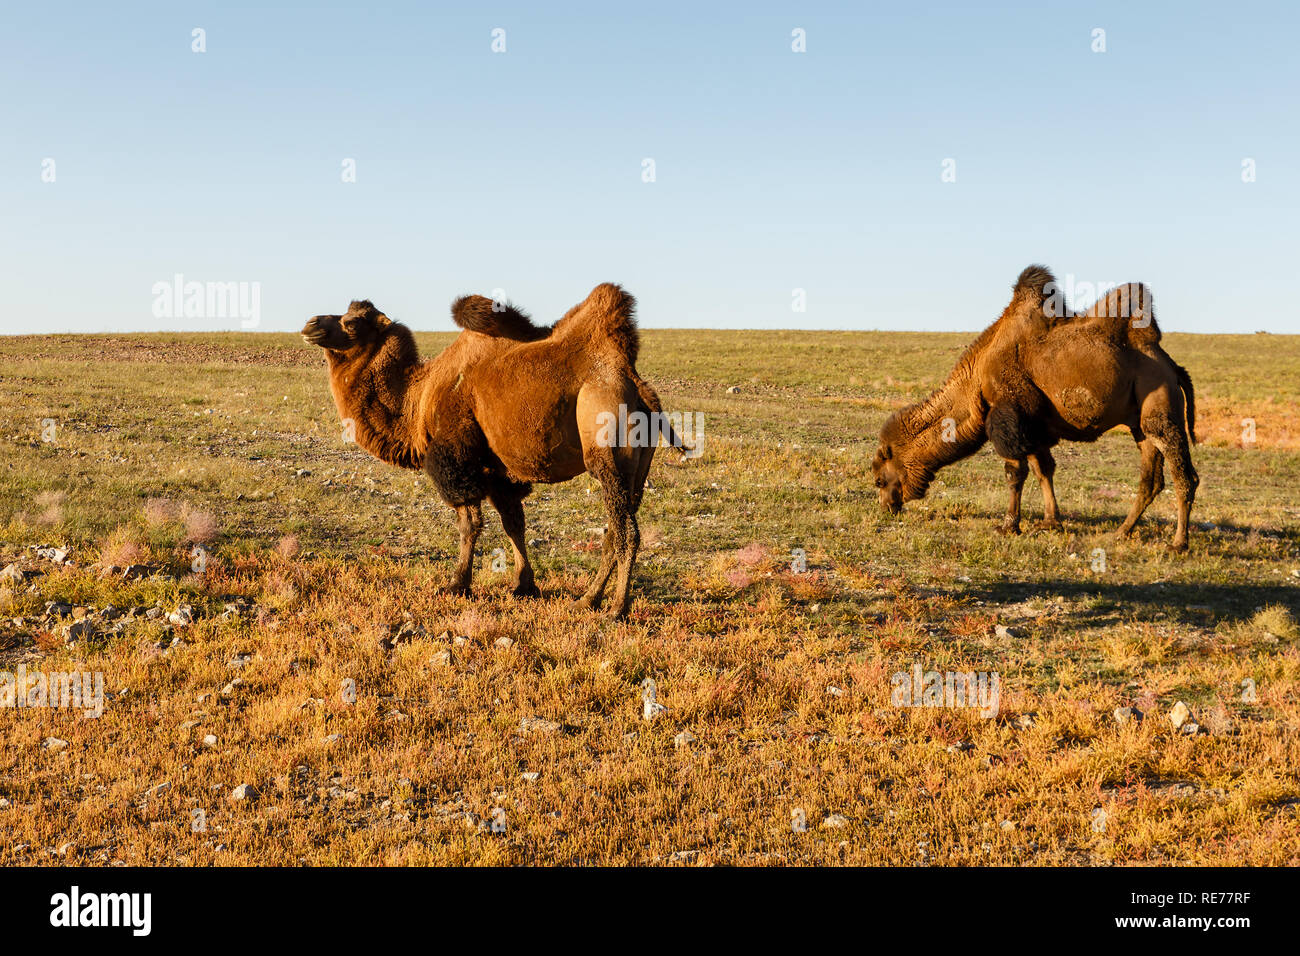 Two Hump Camels Stock Photos & Two Hump Camels Stock Images - Alamy